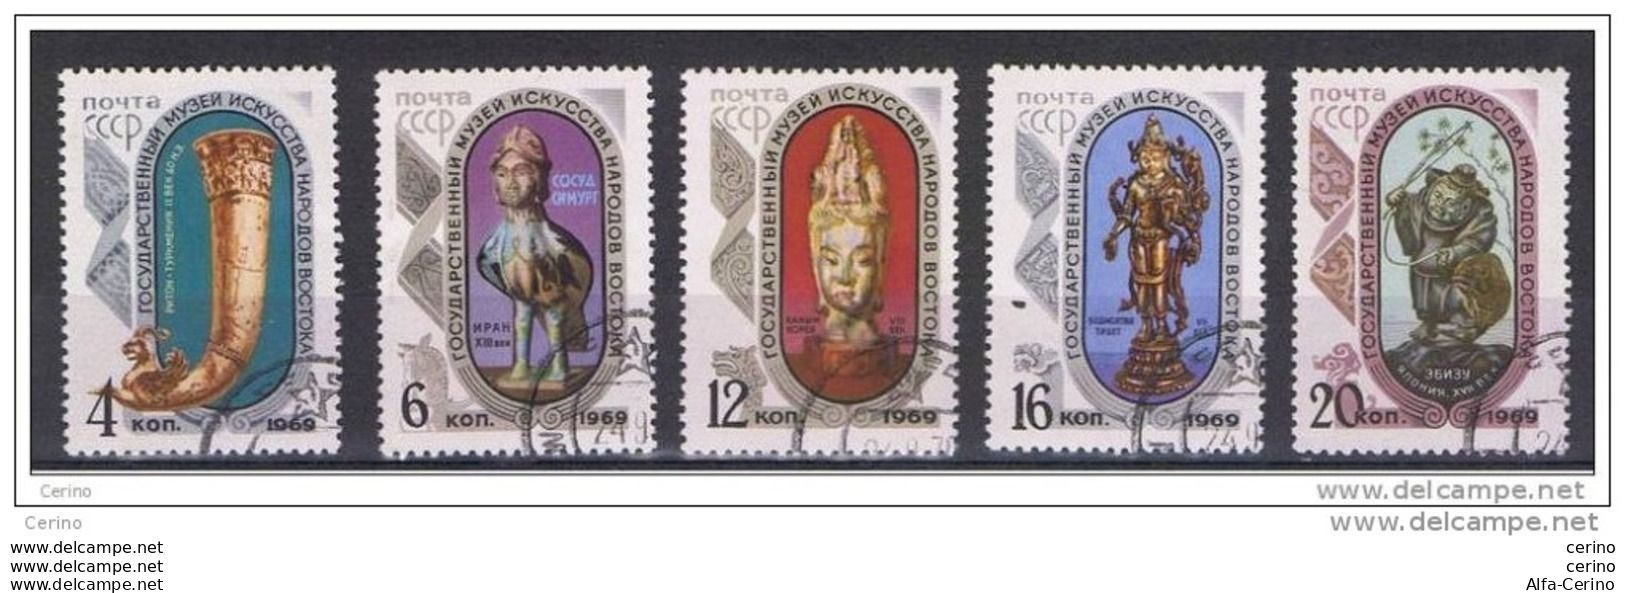 RUSSIA:  1969  MUSEO  -  S. CPL. 5  VAL. US. -  YV/TELL. 3522/26 - Used Stamps